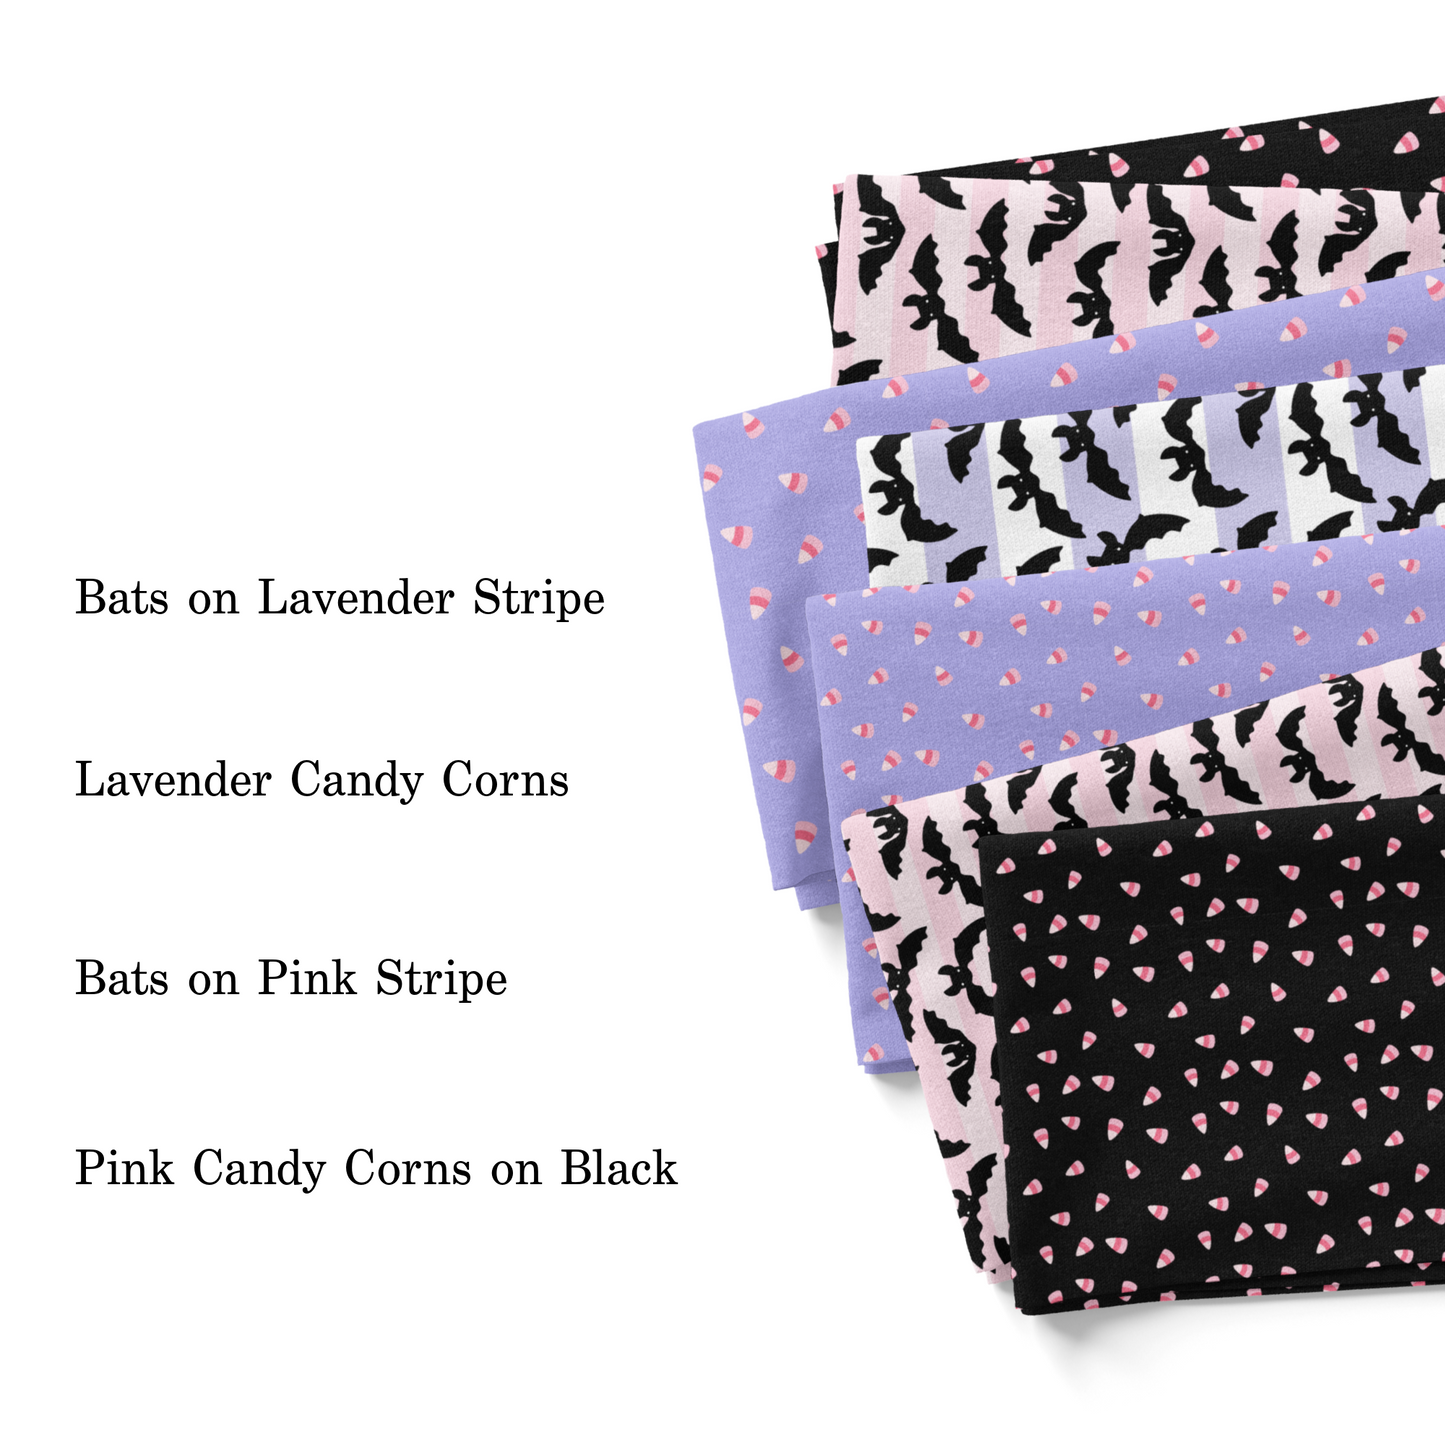 Pink, purple, and black Halloween themed fabric swatches.